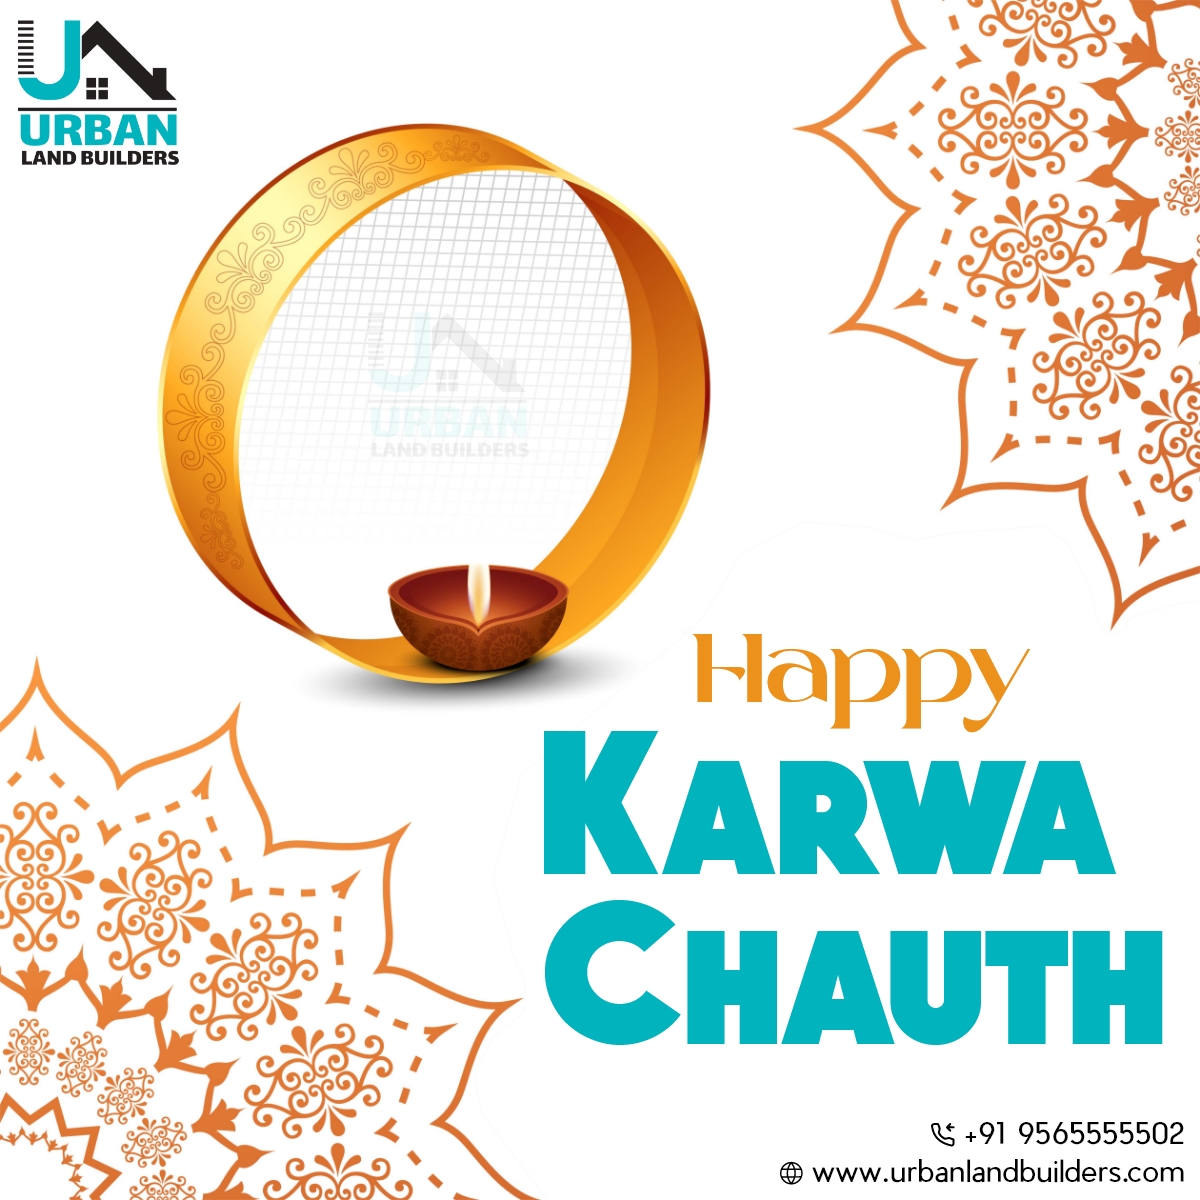 Warm wishes on Karwa Chauth to all the couples. May the moonlight fill your life with joy and prosperity. Happy Karwa Chauth.

#karwachauth #karwachauth2023 #karwachauthspecial #festivevibes #realestate #UrbanLandBuilders